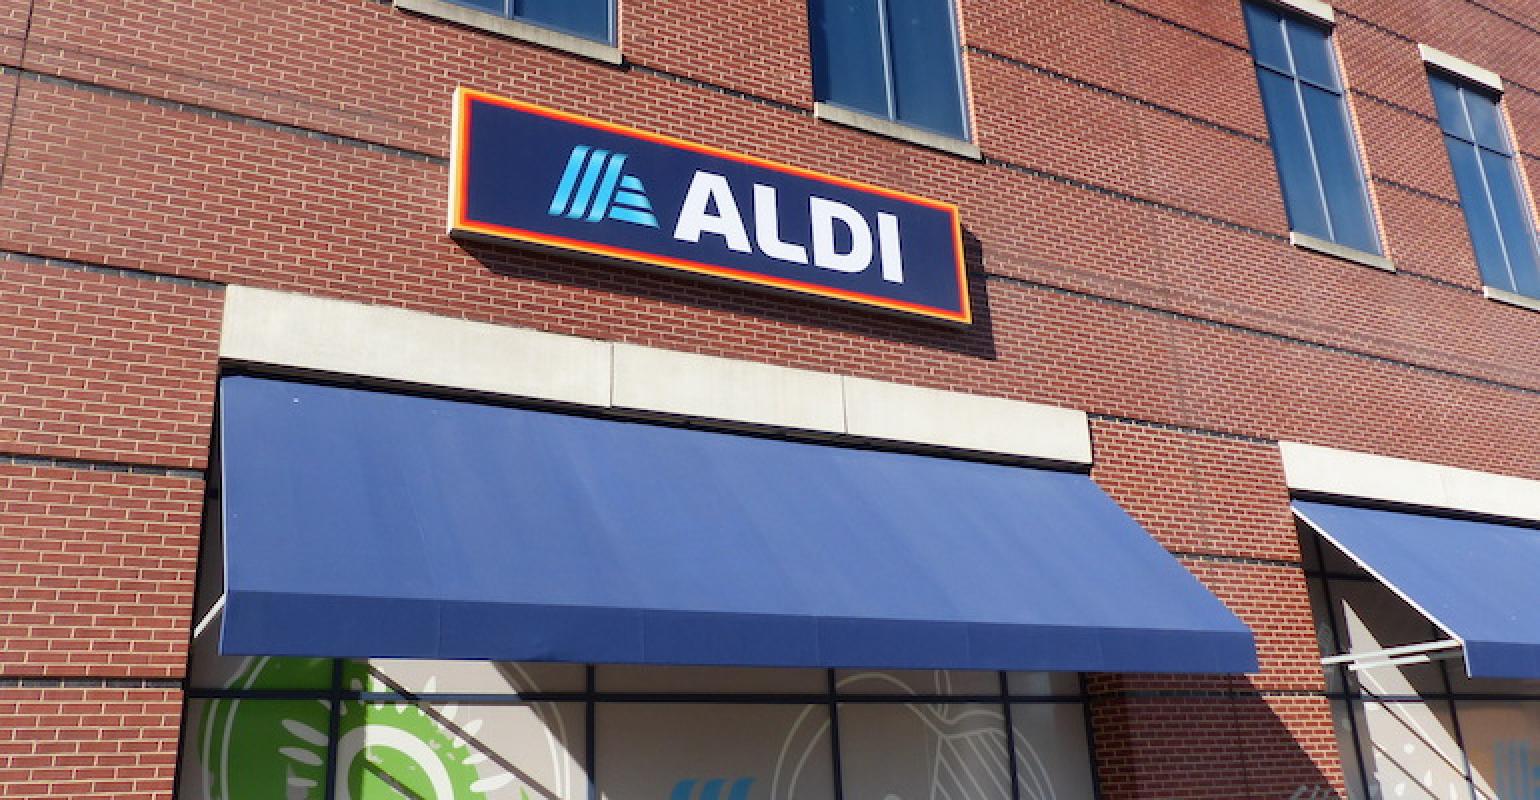 Walmart, Aldi announce grocery delivery plans